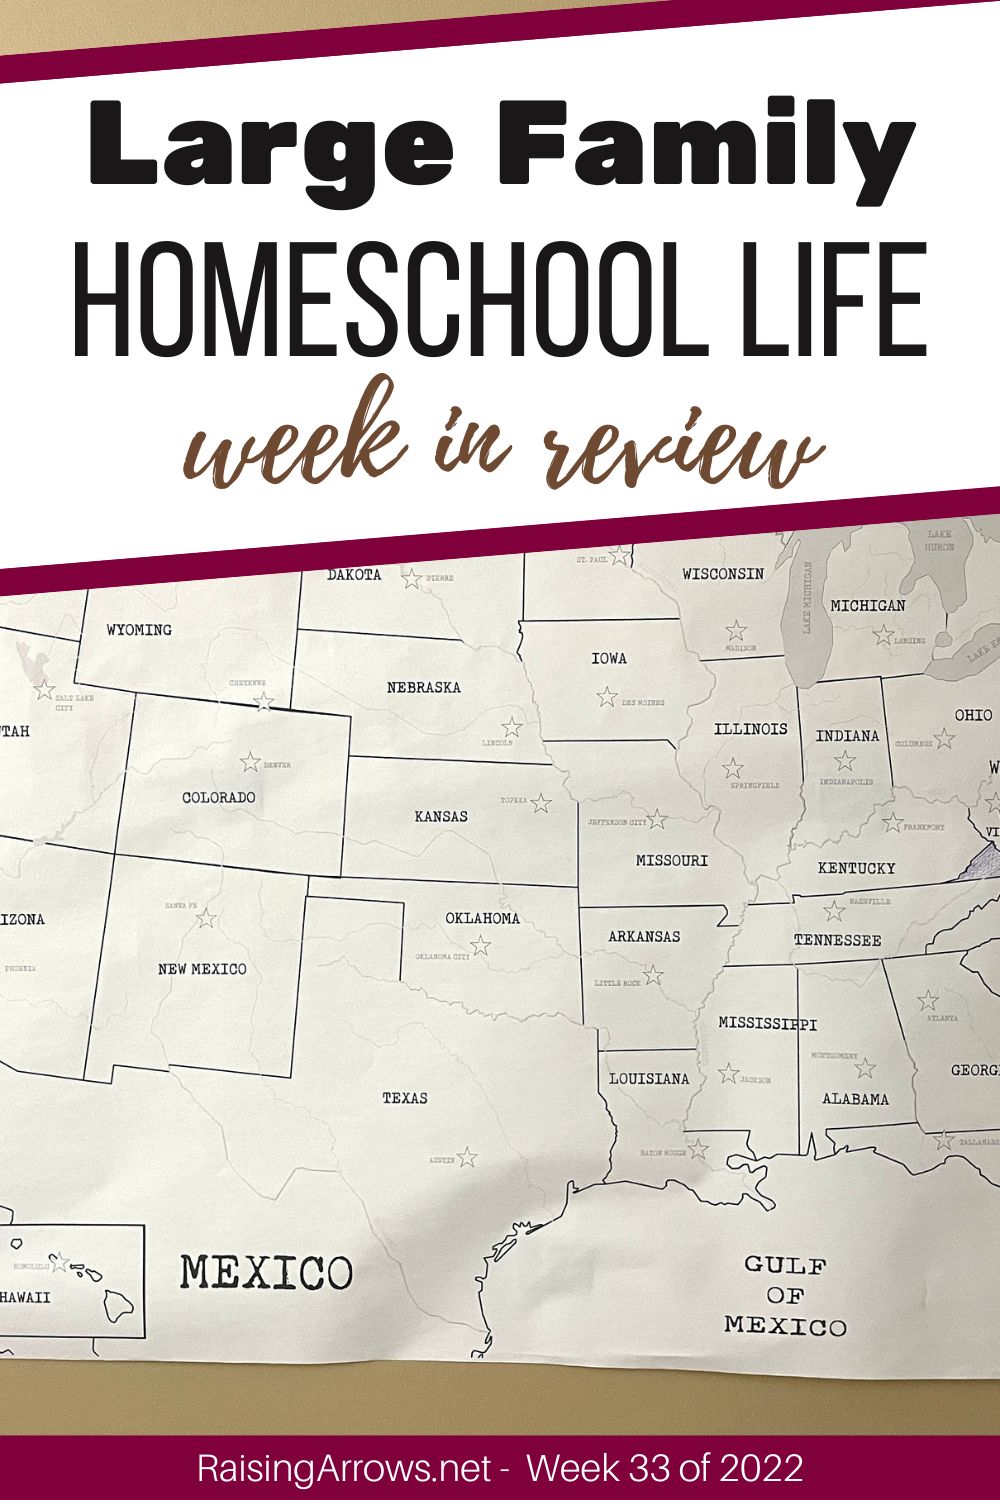 After a long break from weekly updates, we are back and ready to go with a brand new homeschool year!